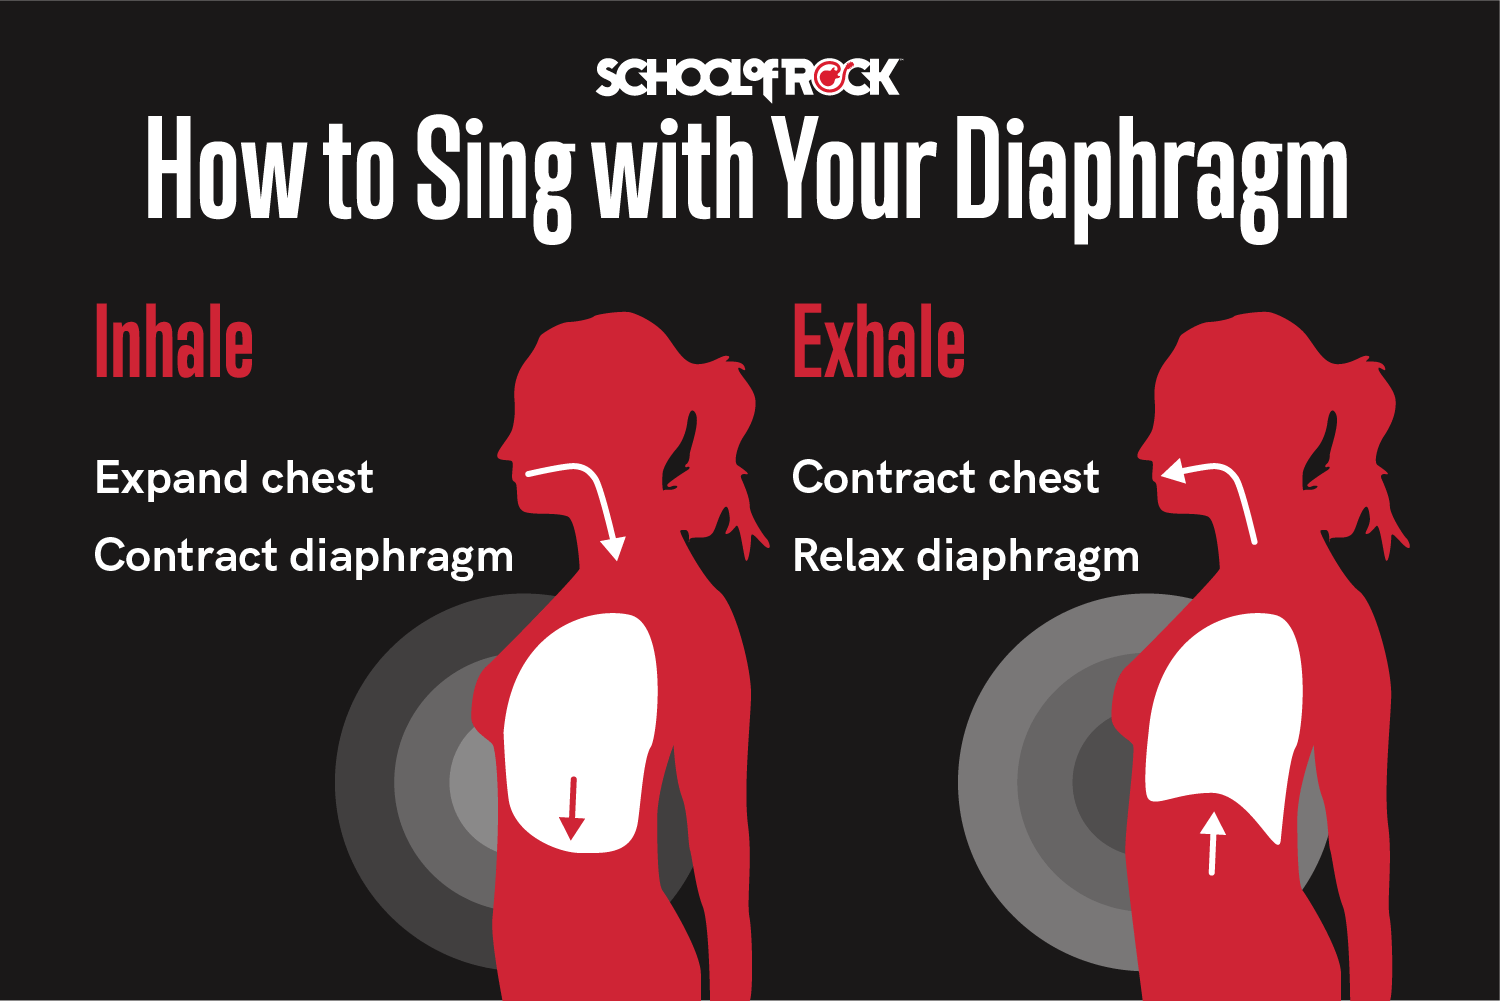 How to sing with your diaphragm